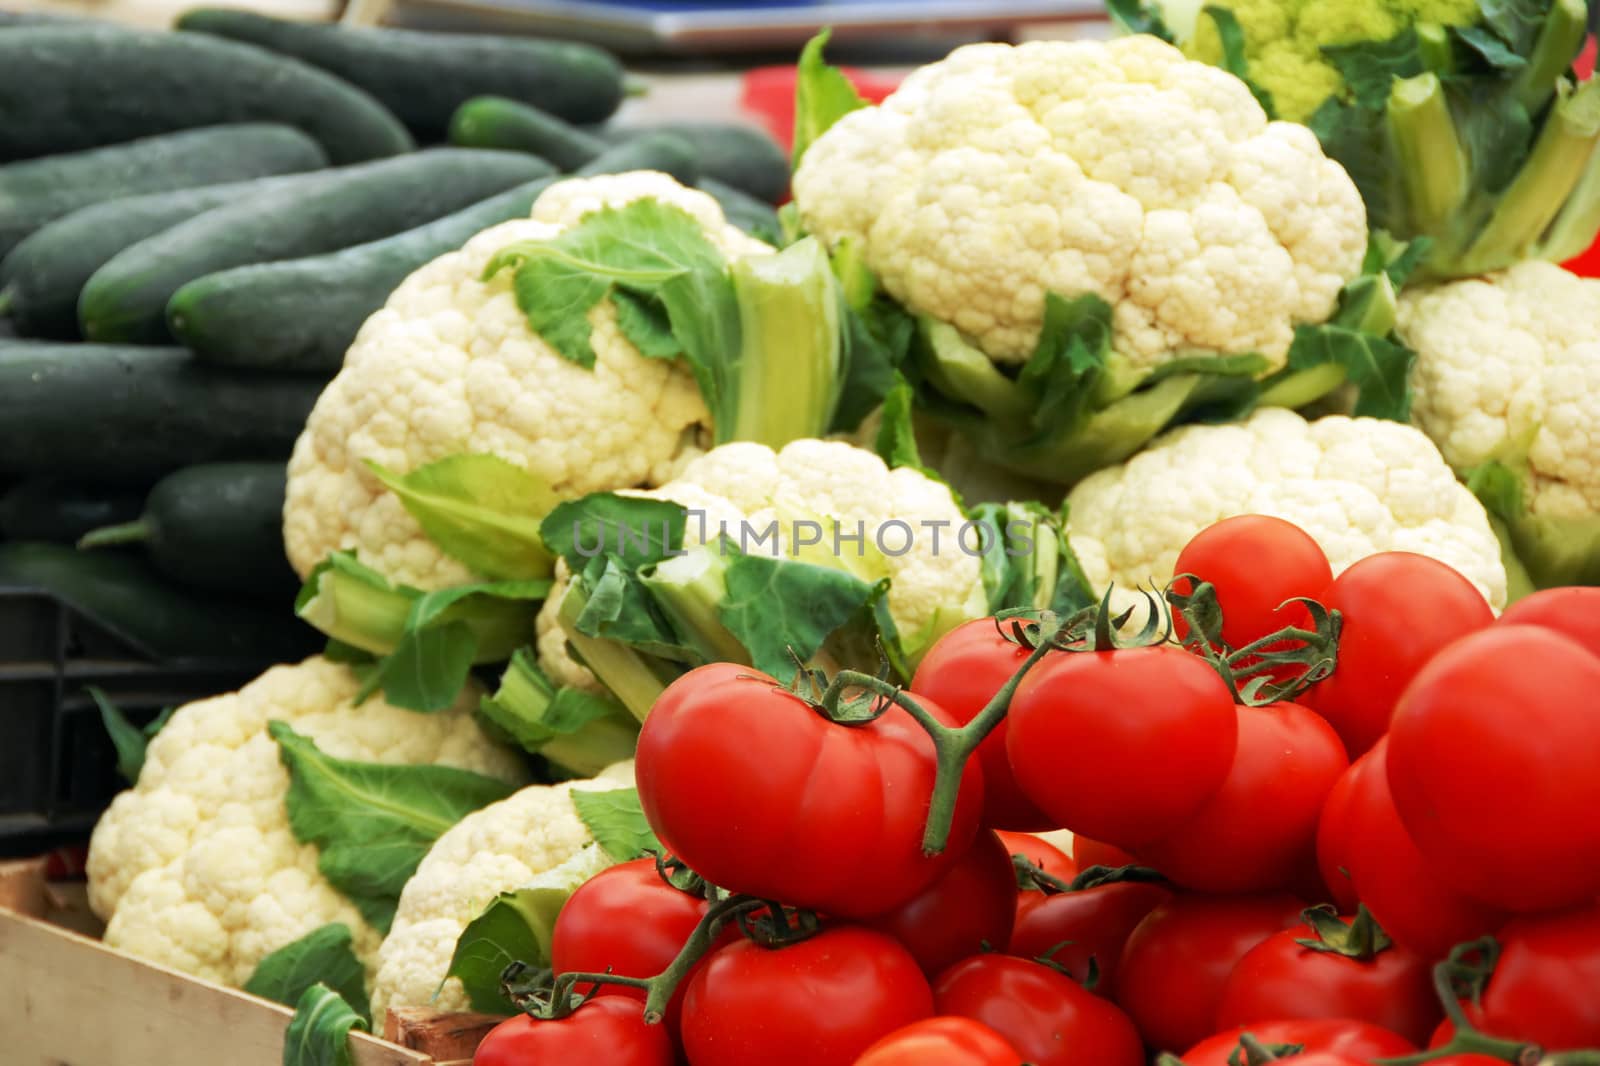 Vegetables on market by simply